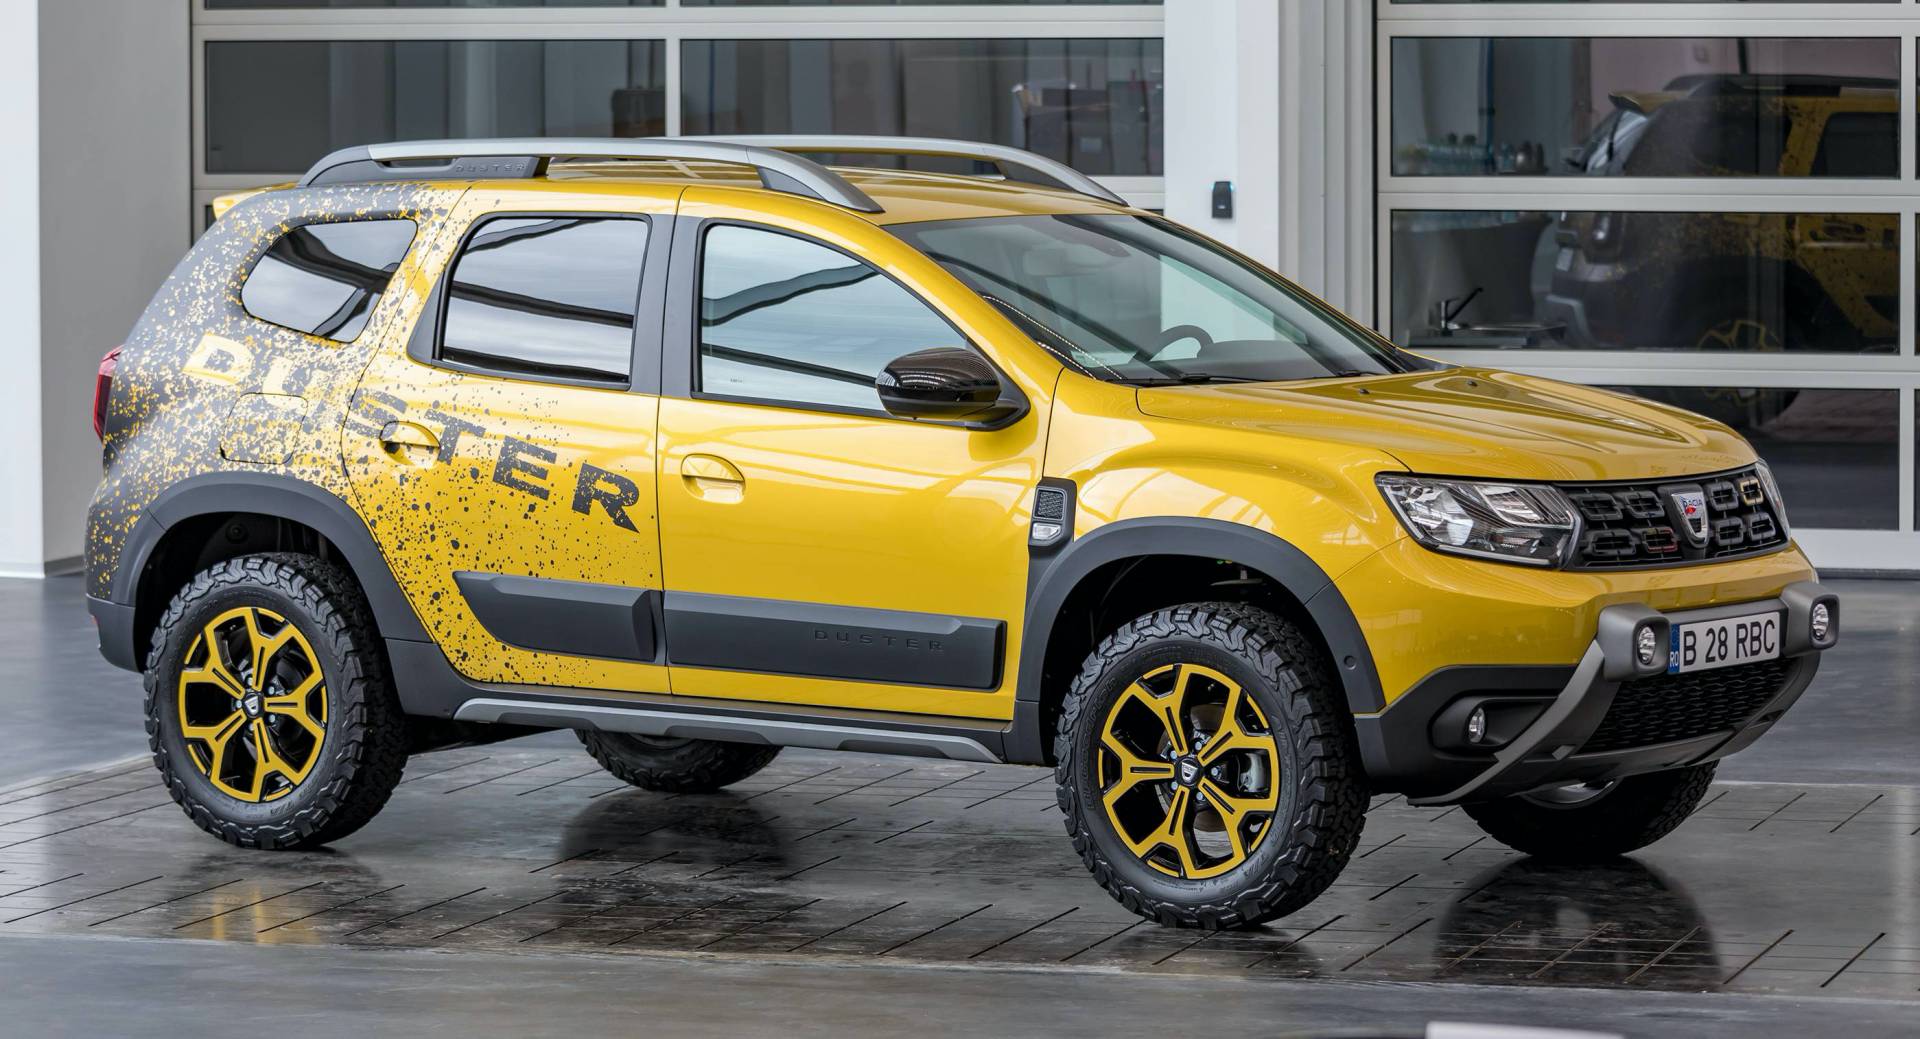 Dacia Duster Was EU's Second Best-Selling Car In August Behind The VW Golf  – See How The Rest Fared